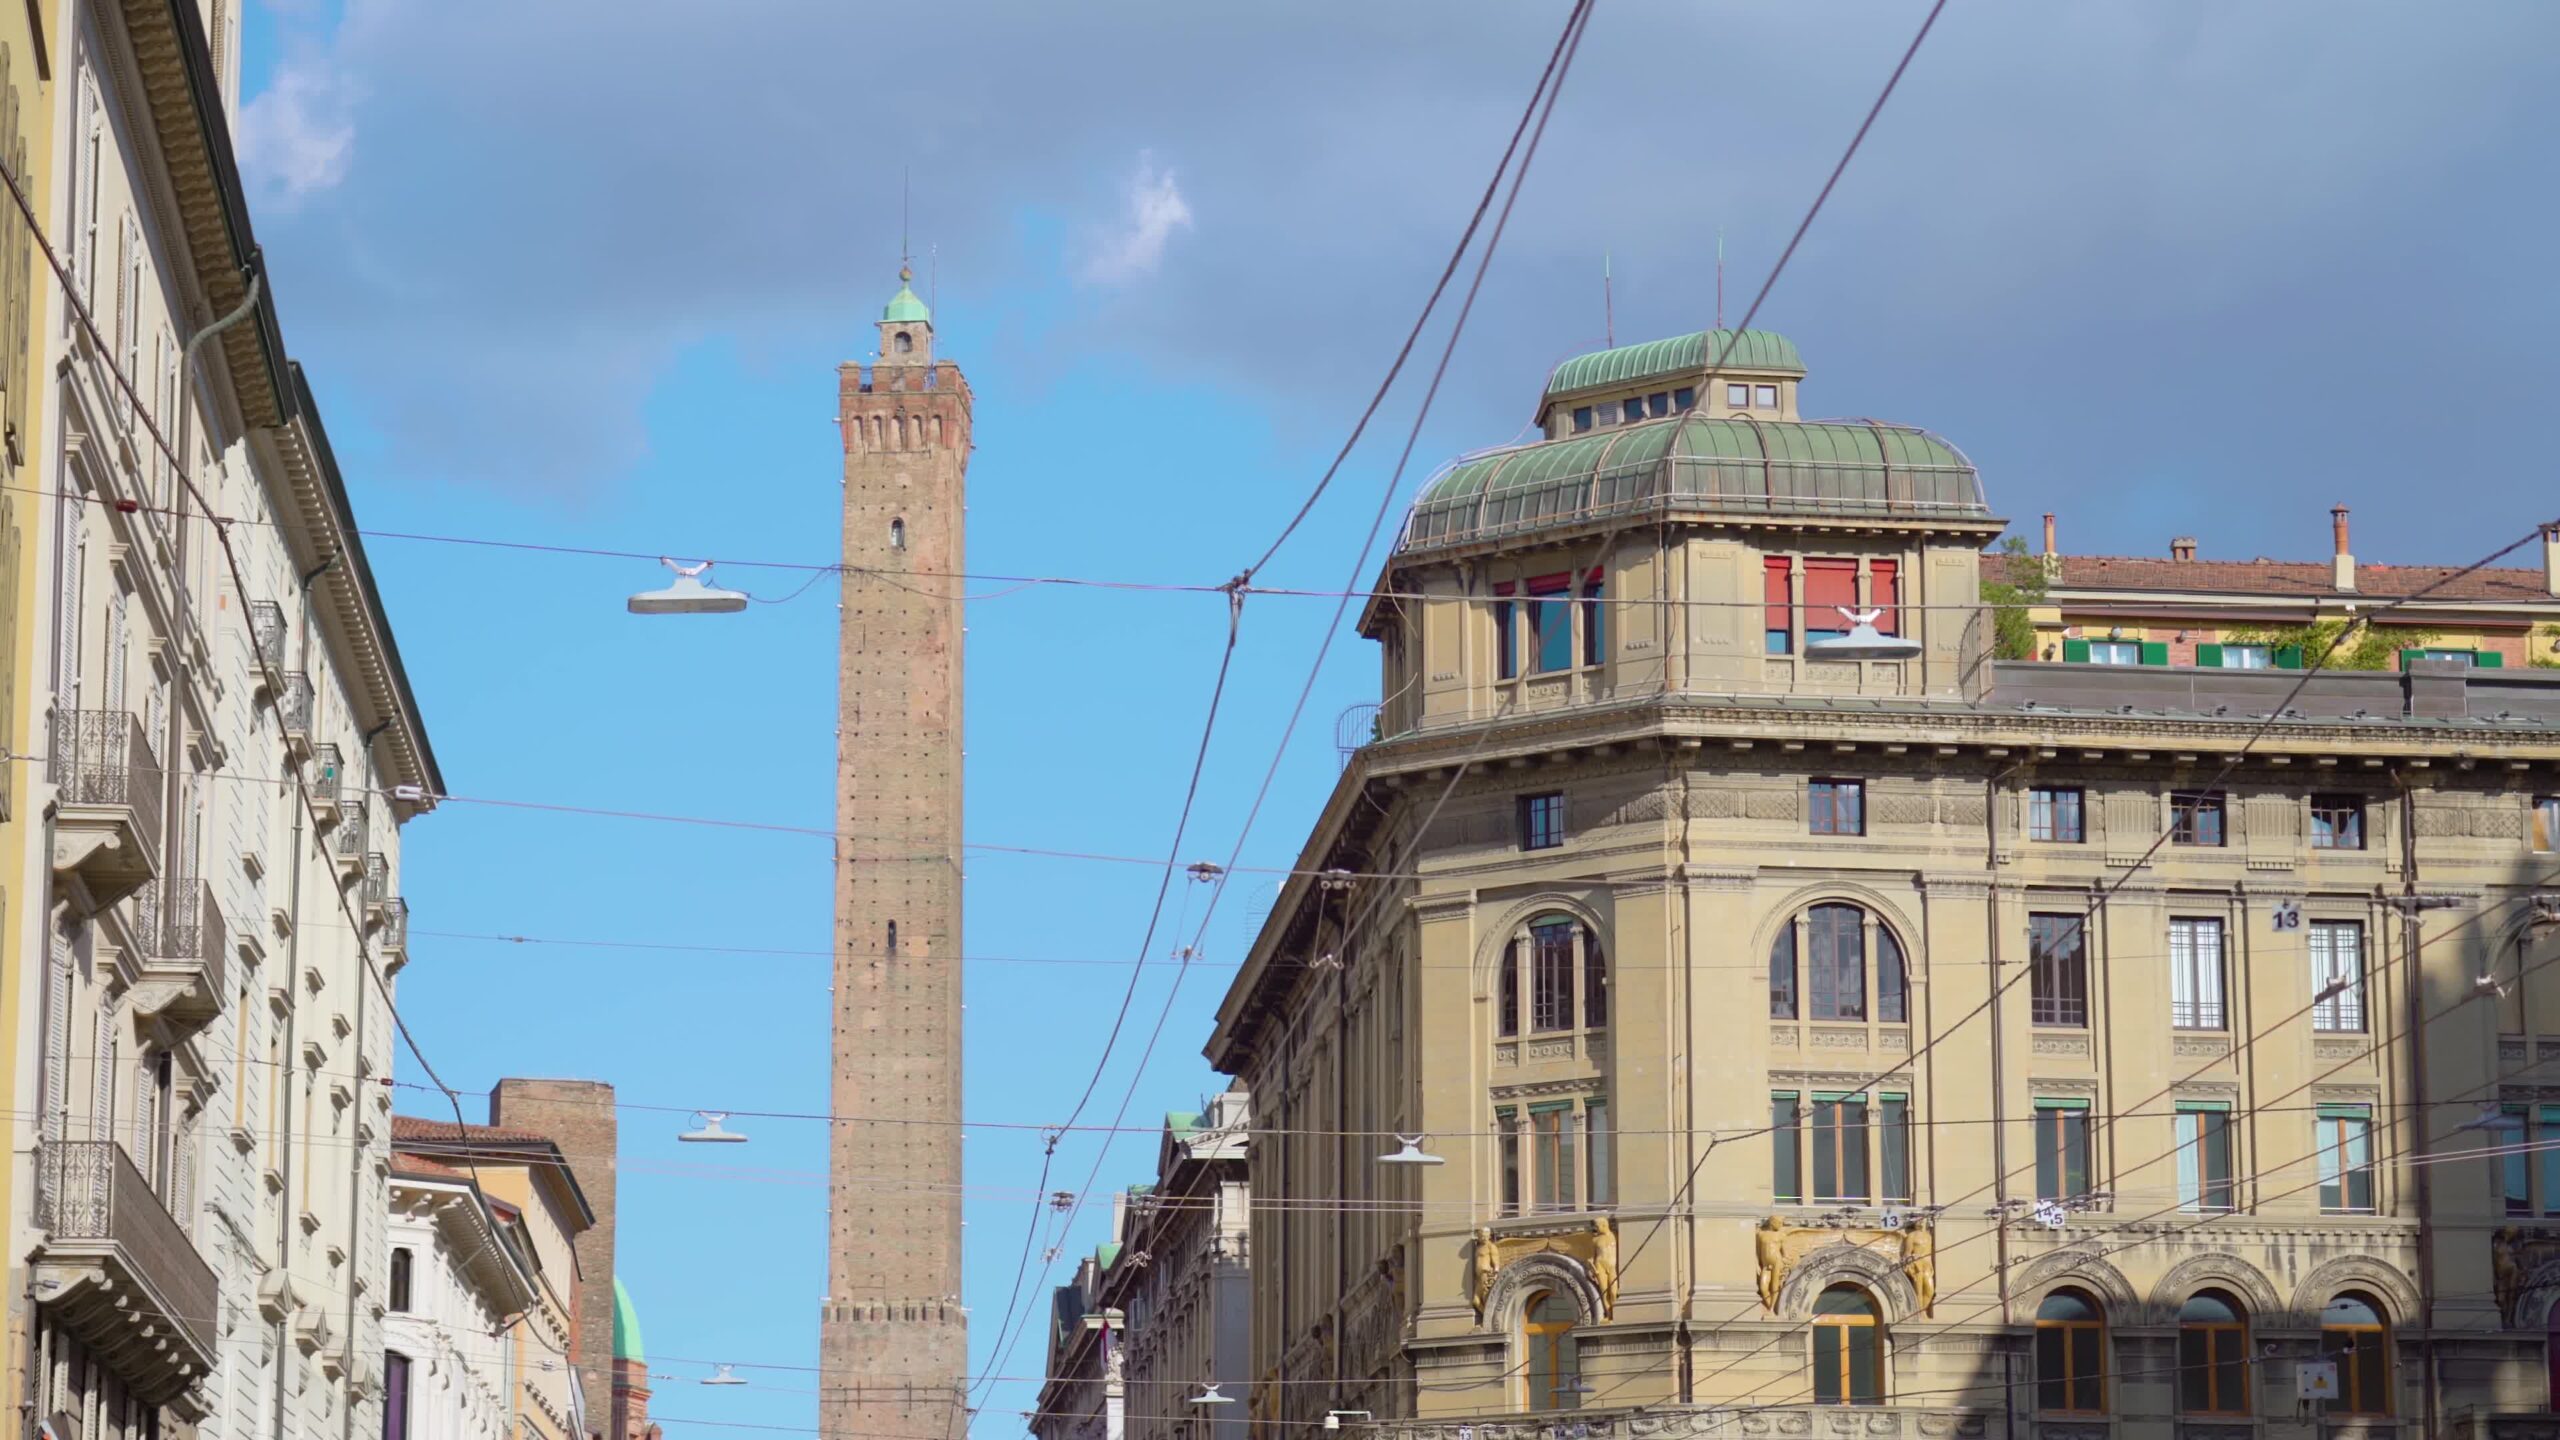 Asinelli and Garisenda towers located in Bologna downtown